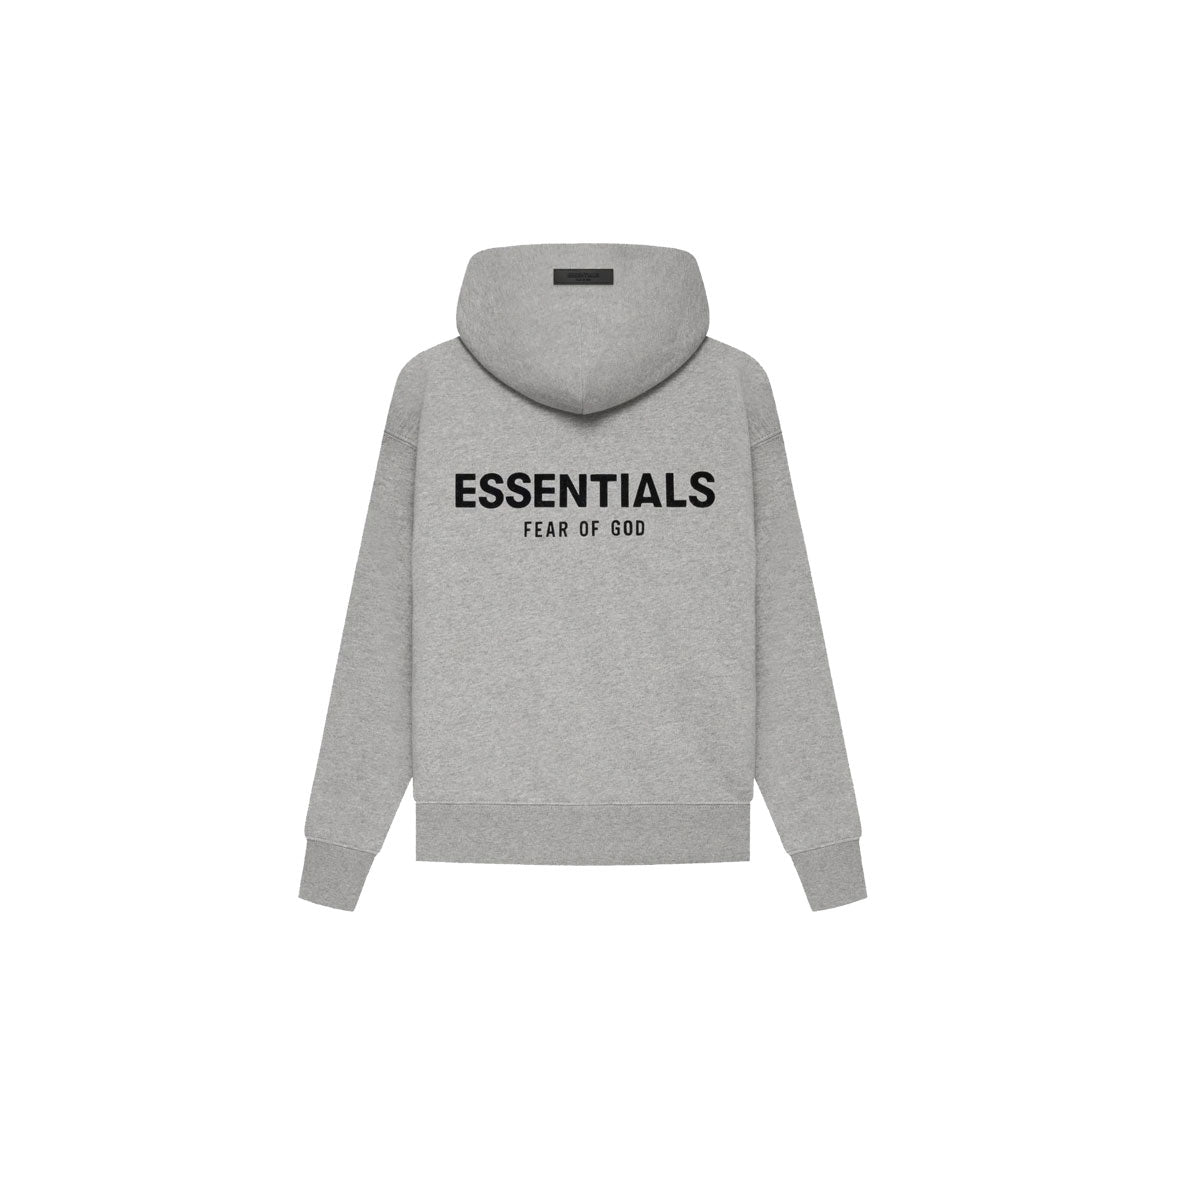 KIDS ESSENTIALS HOODIE - Why are you here?